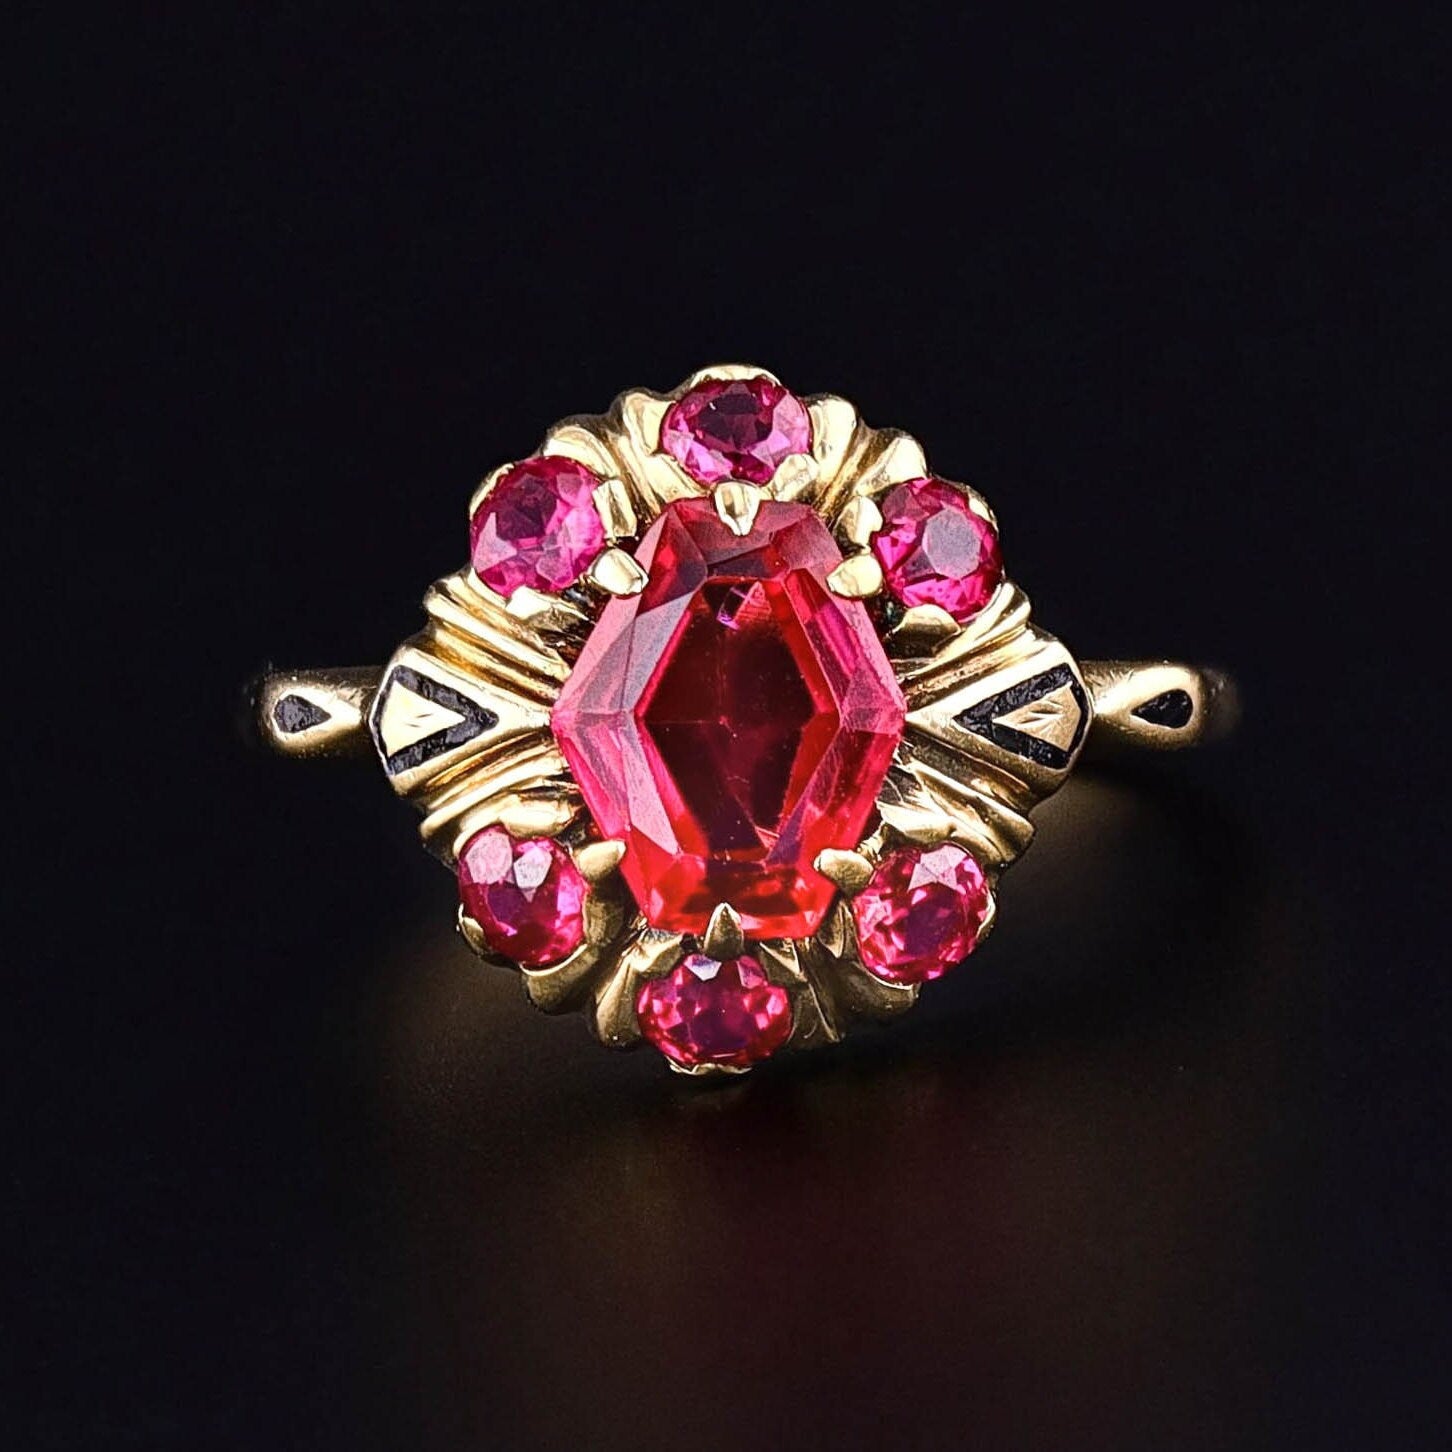 Antique Synthetic Ruby Ring of 10k Gold